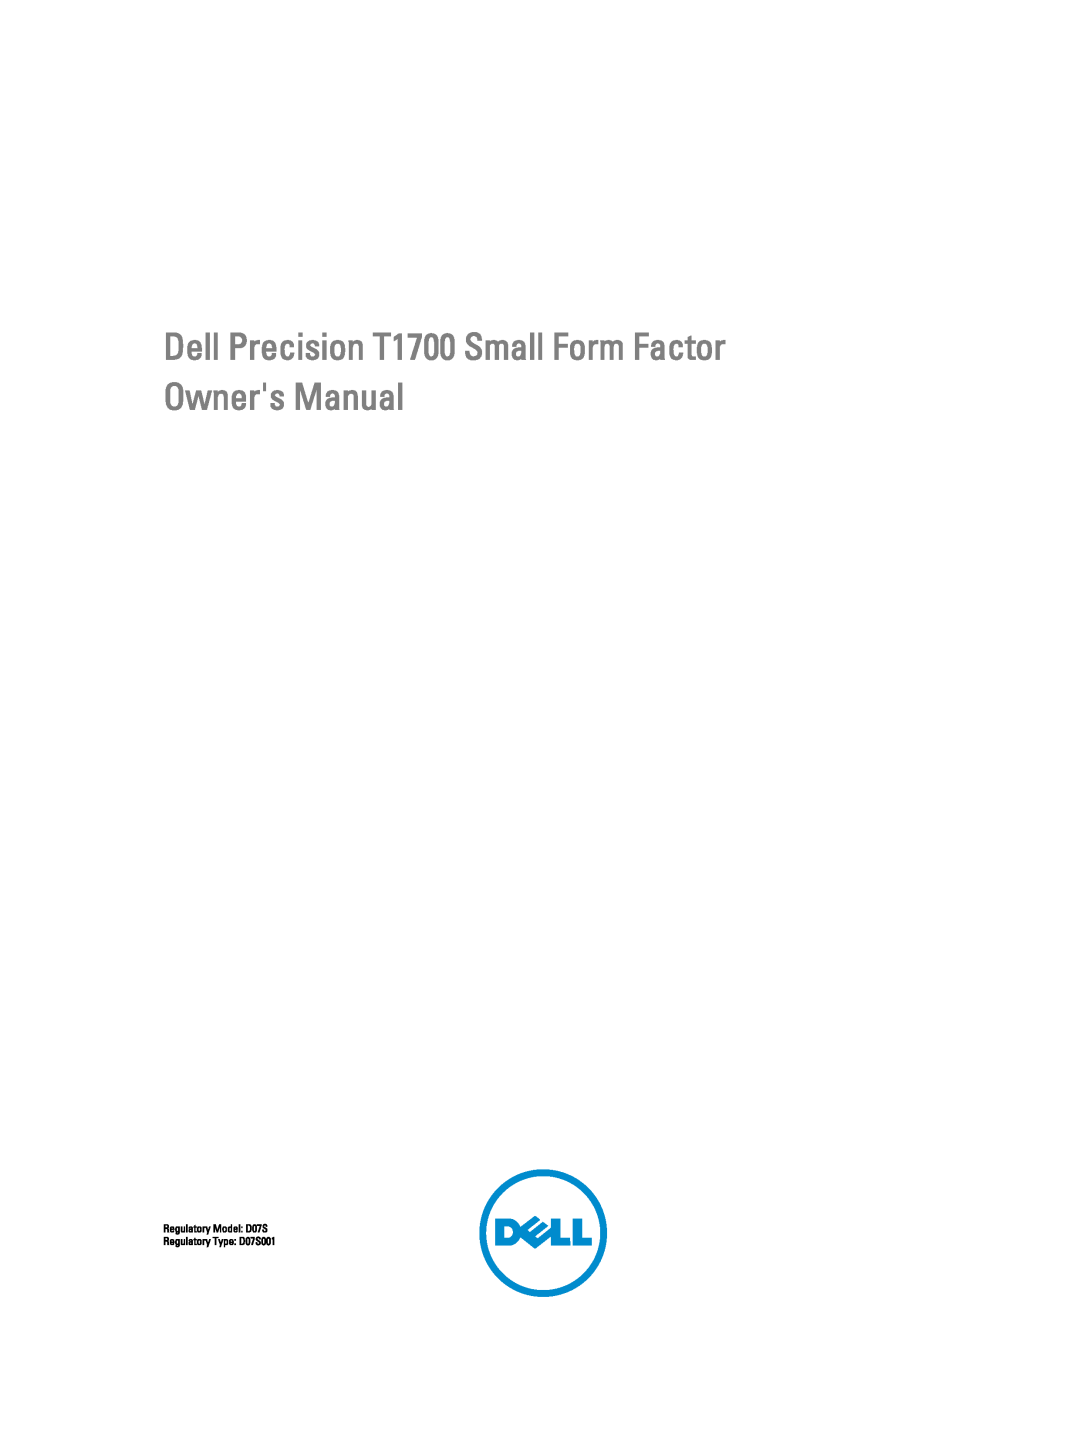 Dell T1700 manual Reference, Volatility Description, User Accessible, Remedial Action, Designator, for external data 